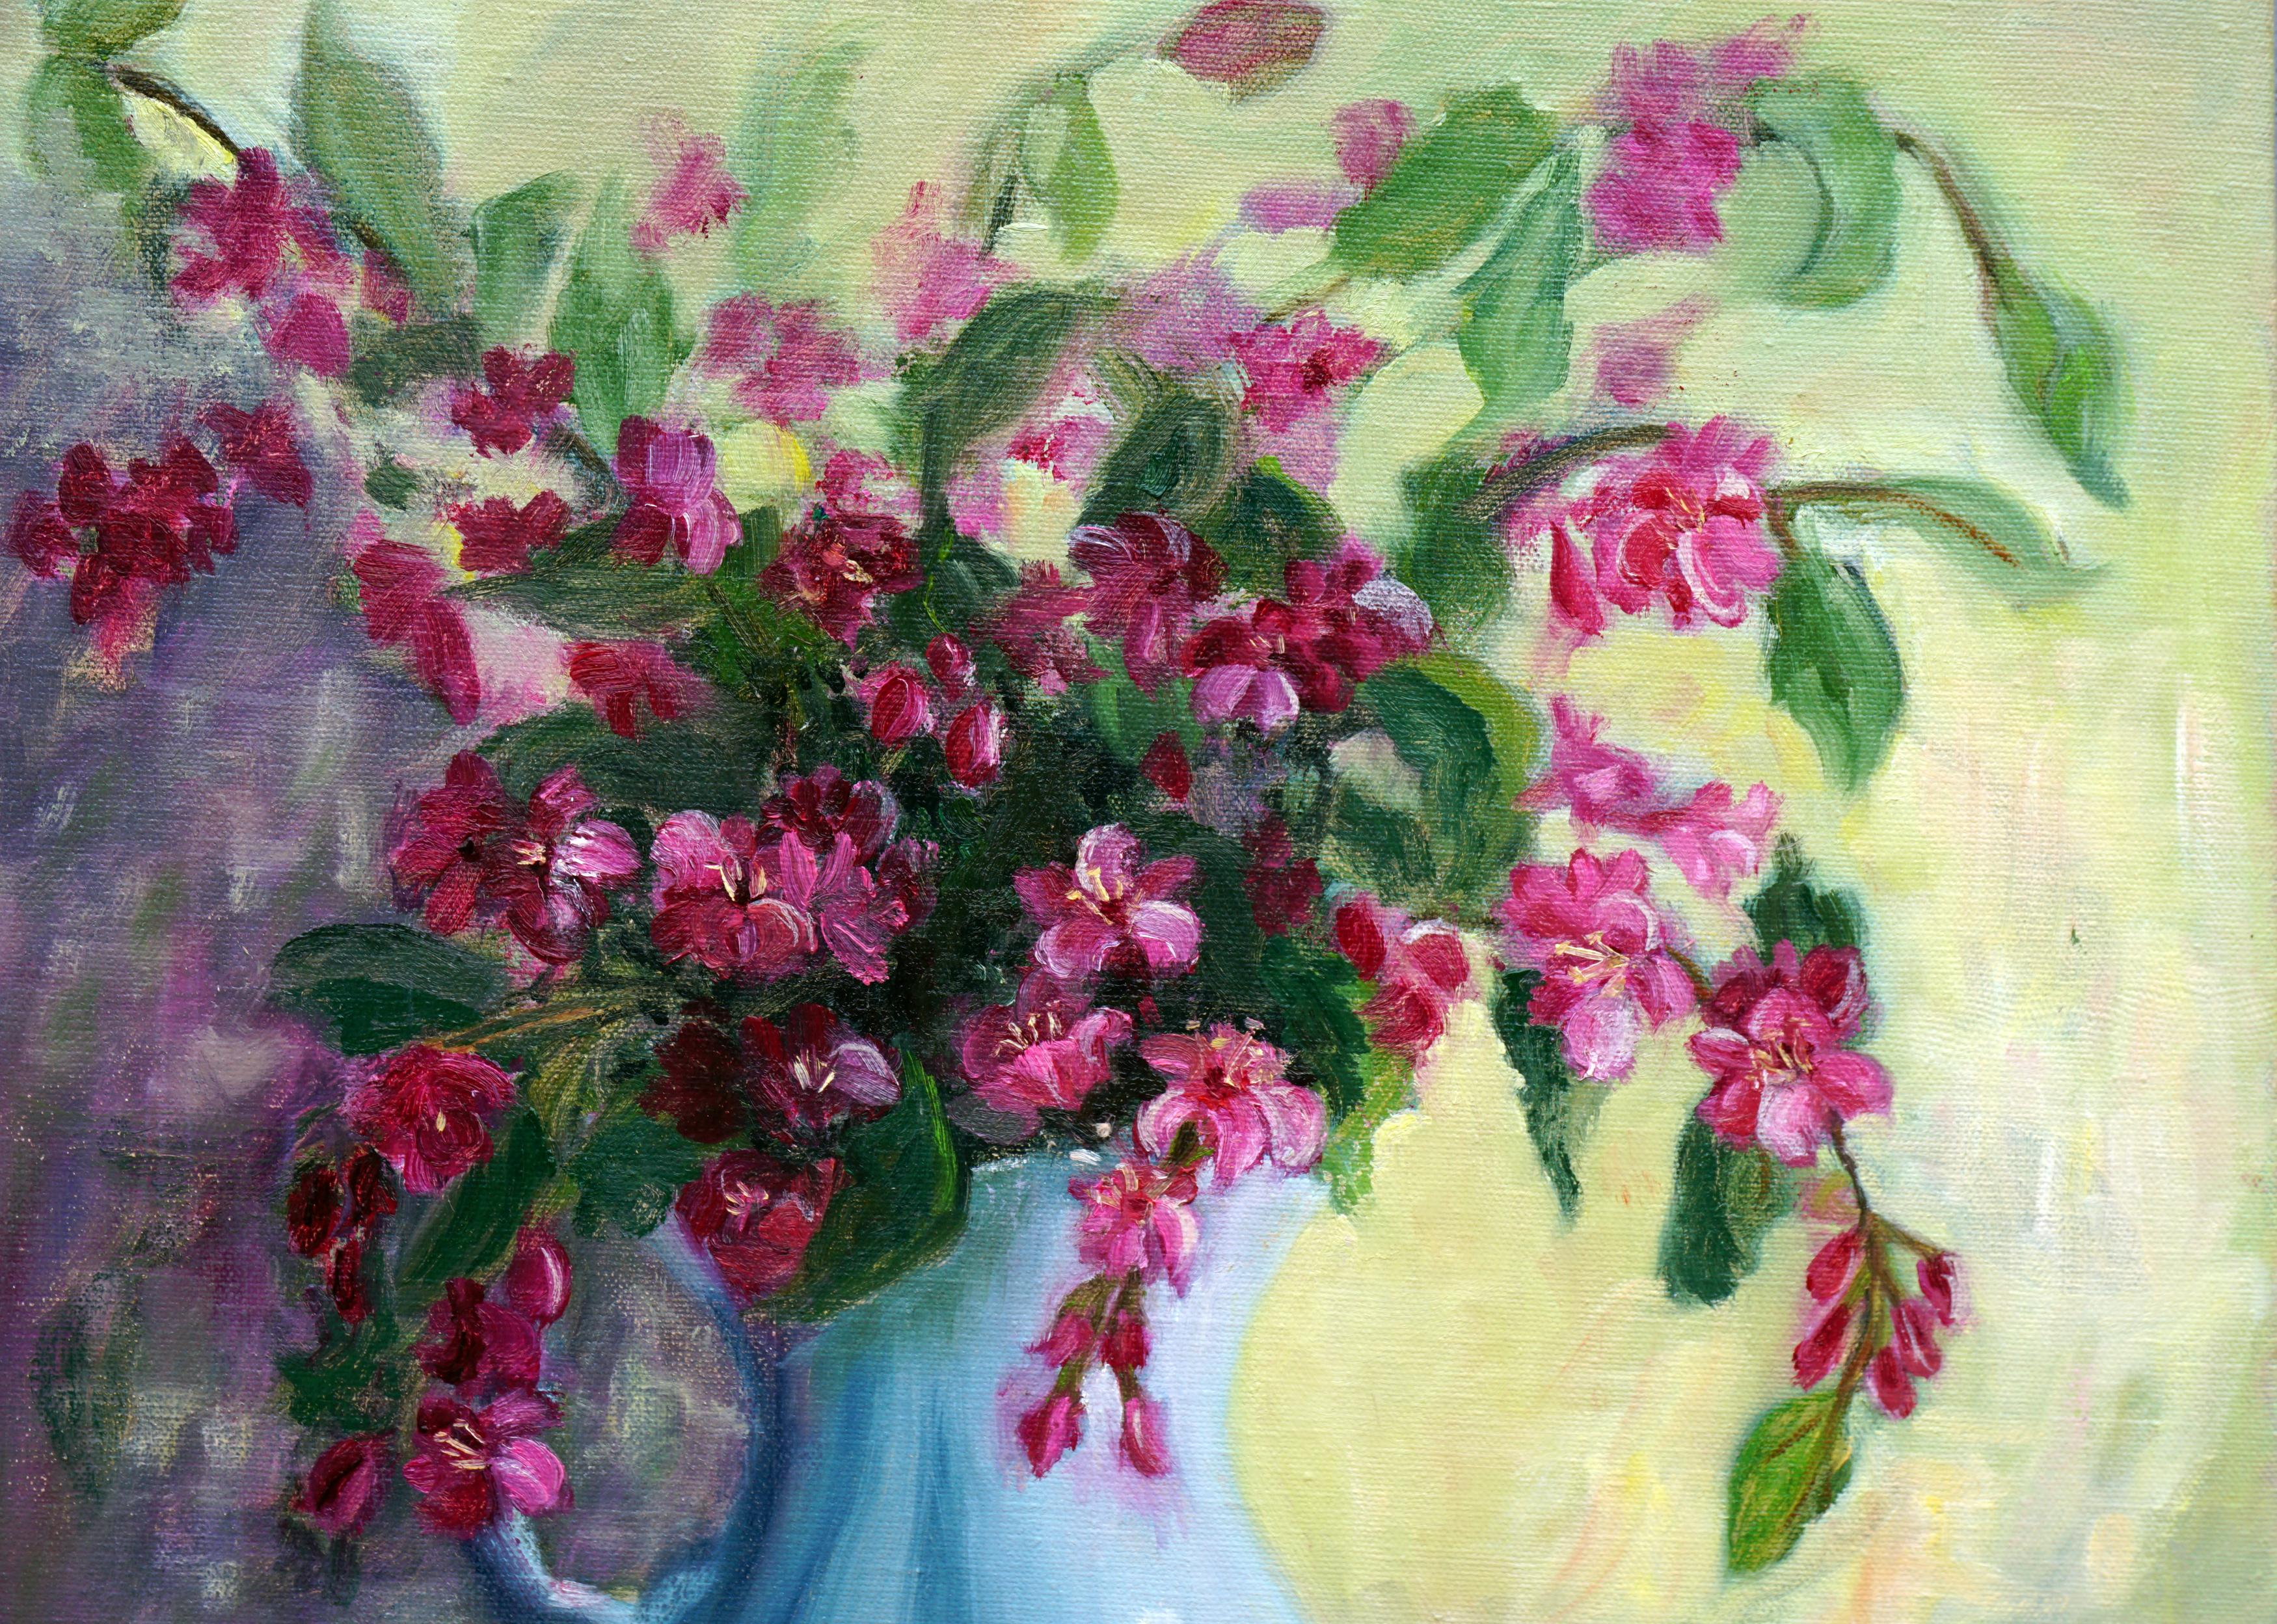 Weigela in Blue Pitcher - Floral Still Life - Painting by Jimminez